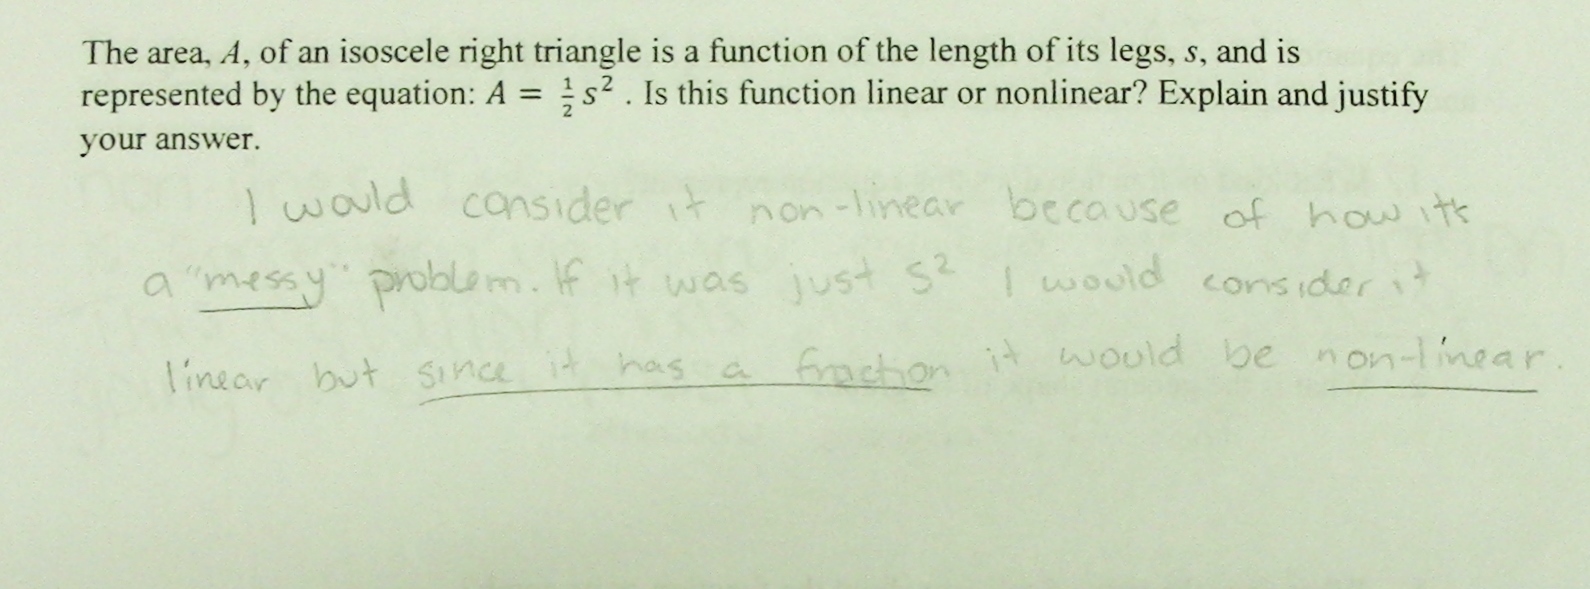 nonlinear difference equation